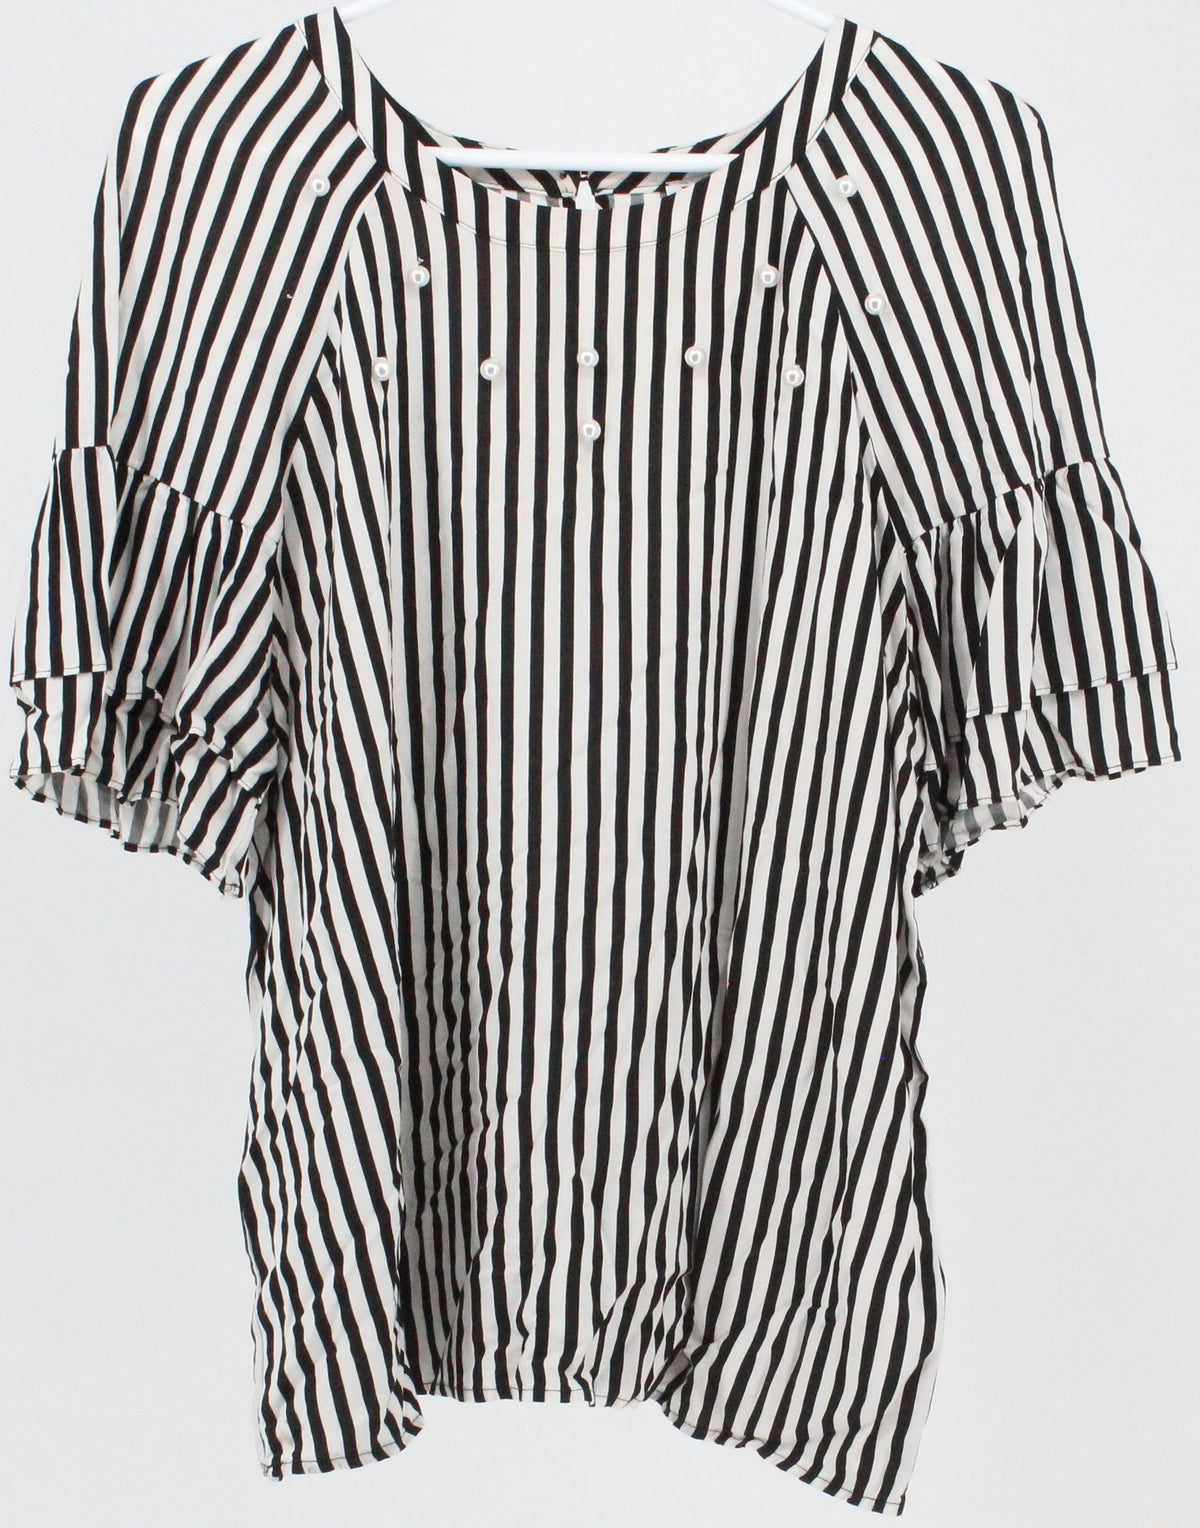 DR2 Black and White Striped Top